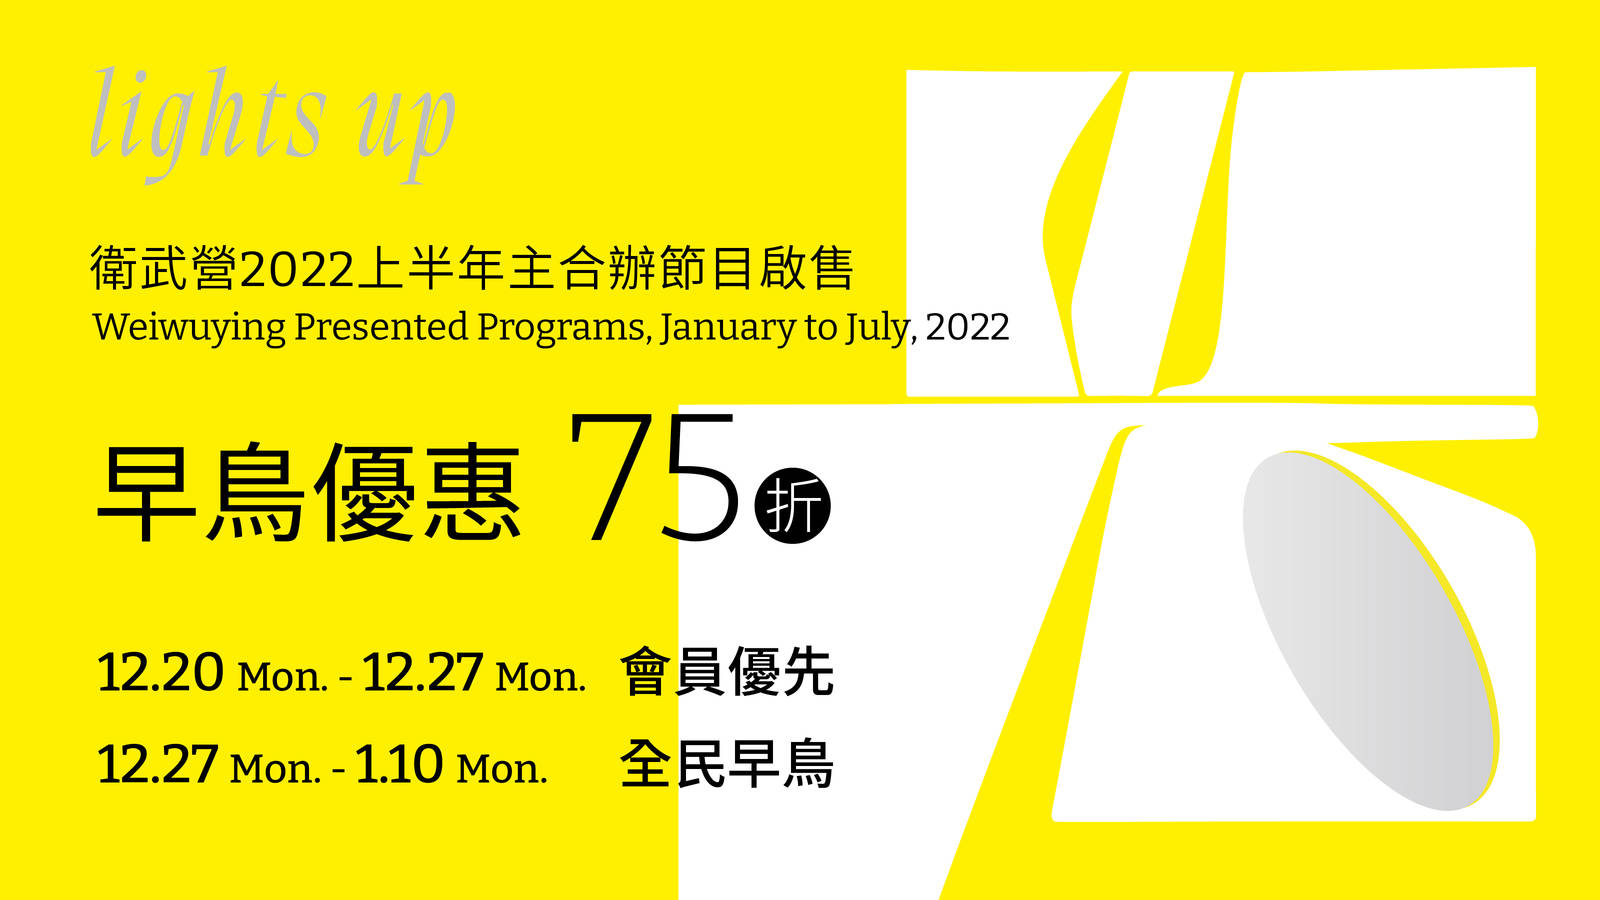 Lights up! Weiwuying Unveiling 2022, January to July